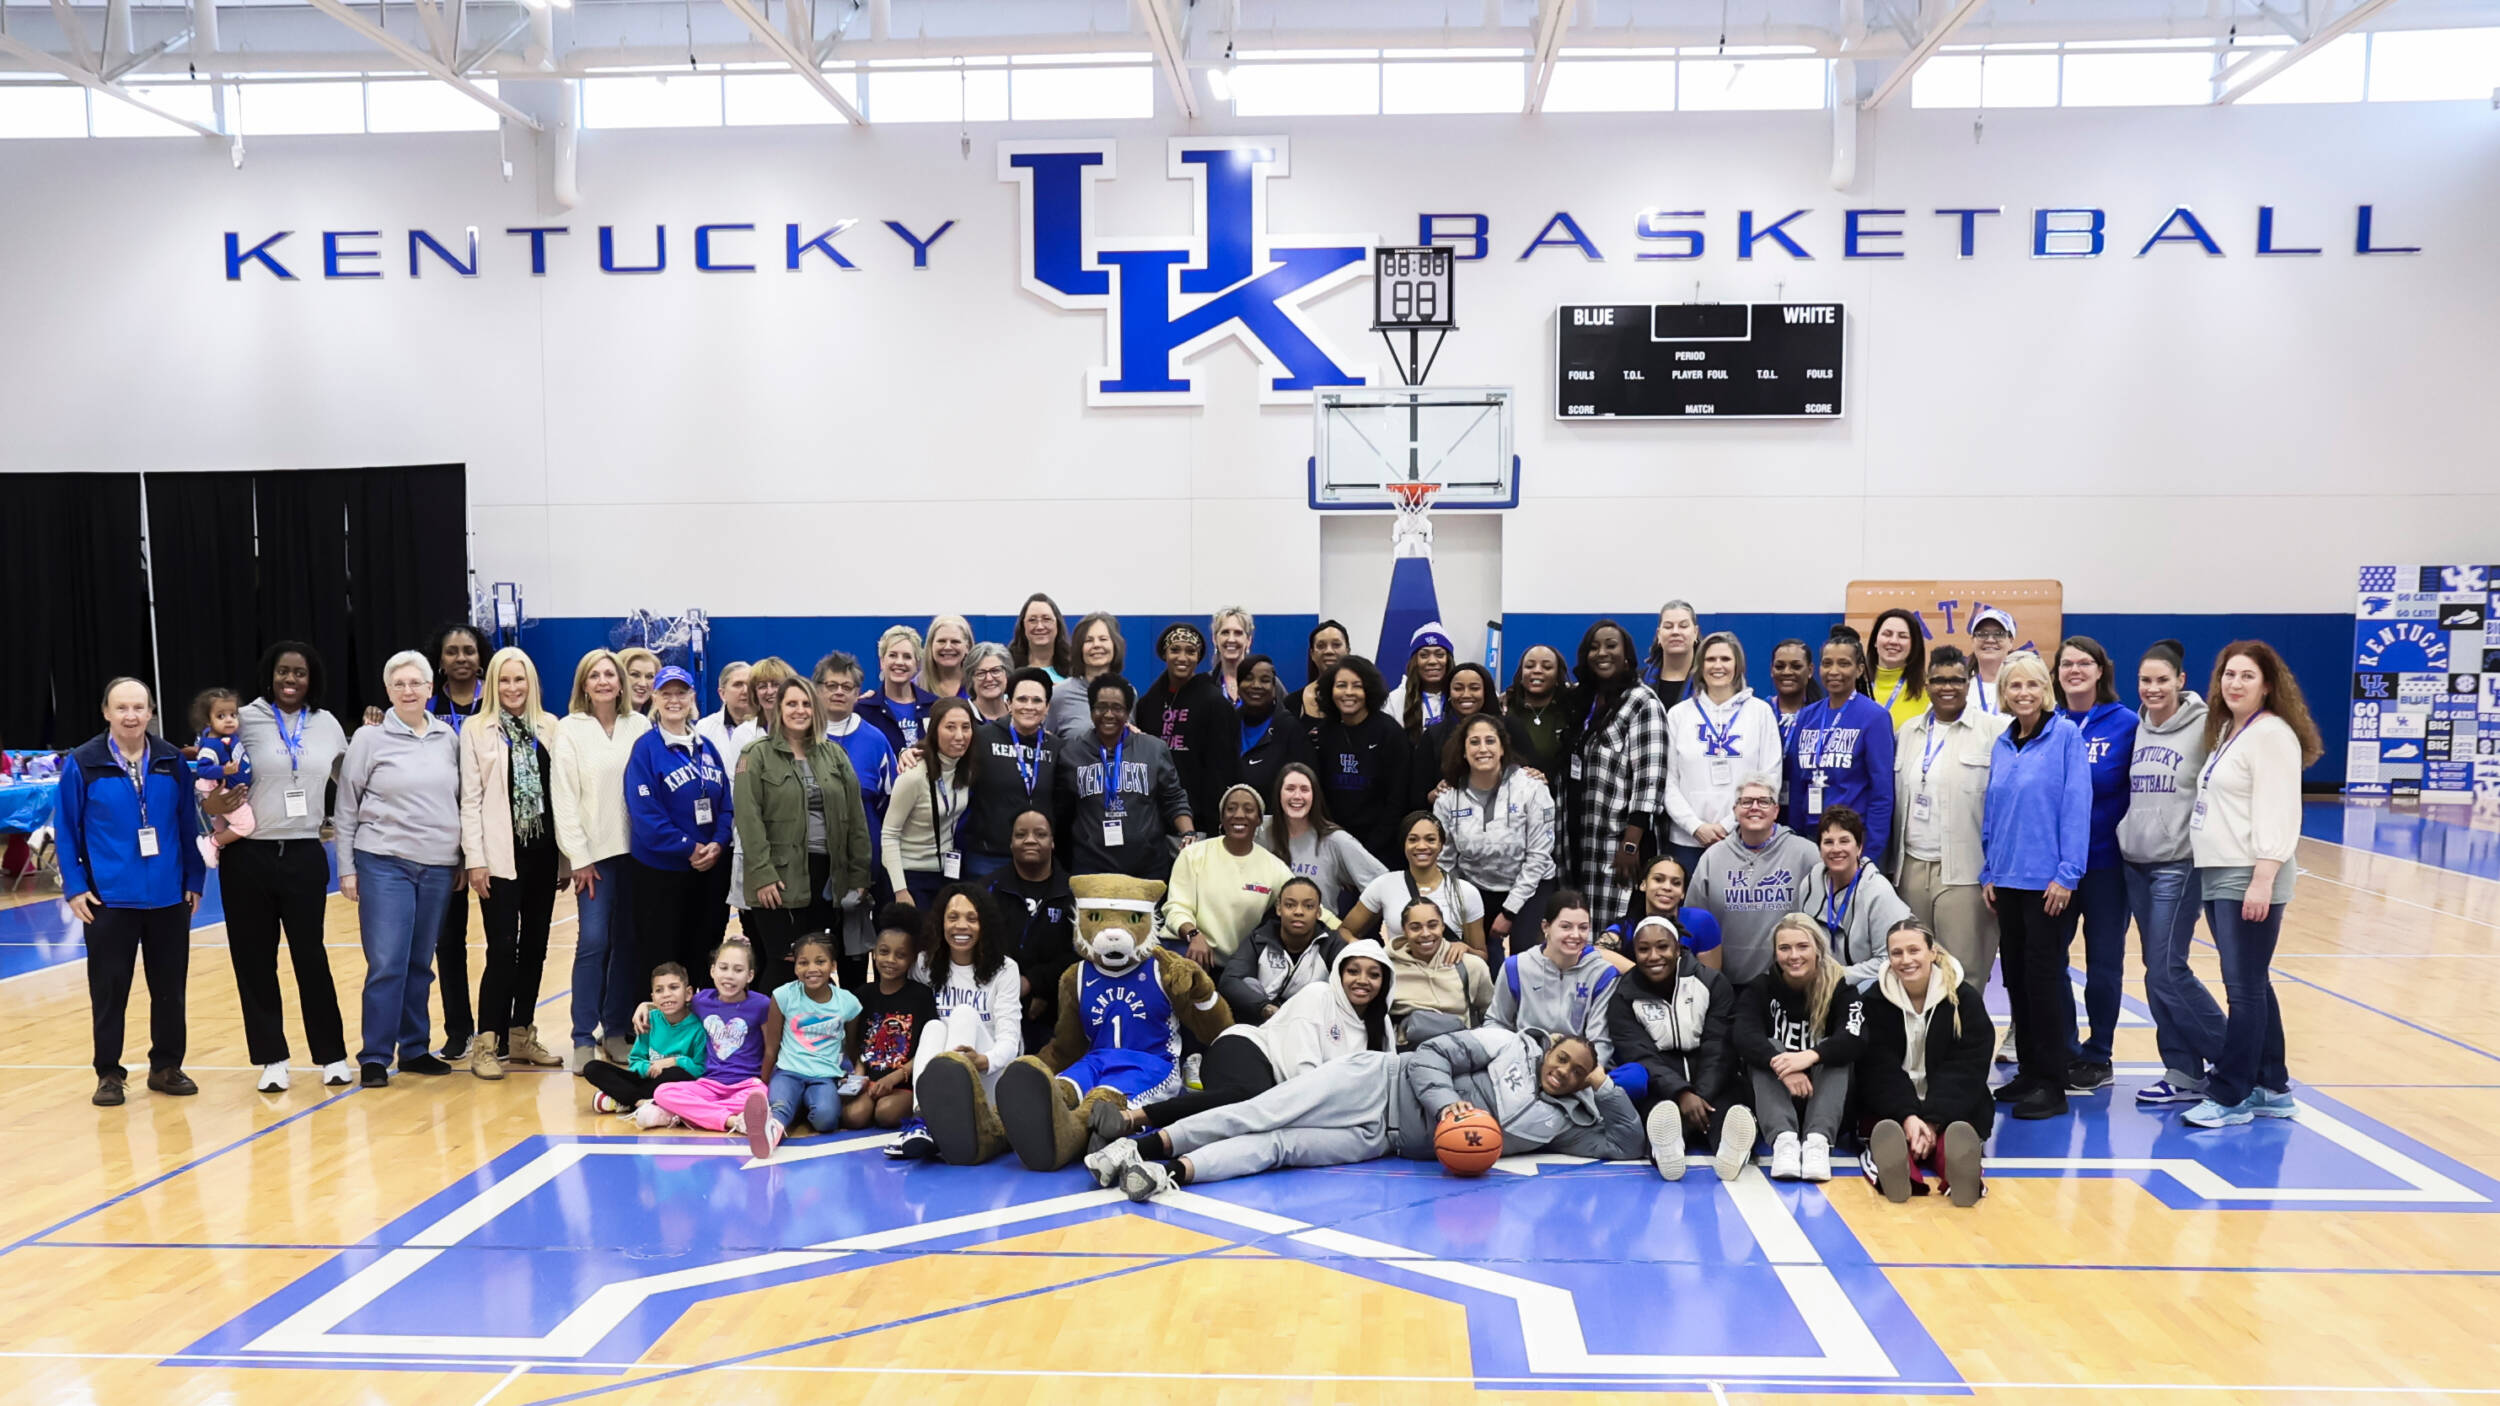 Kentucky Welcomes Back More Than 90 Alumni for Wildcats, Gators in Rupp Arena on Sunday